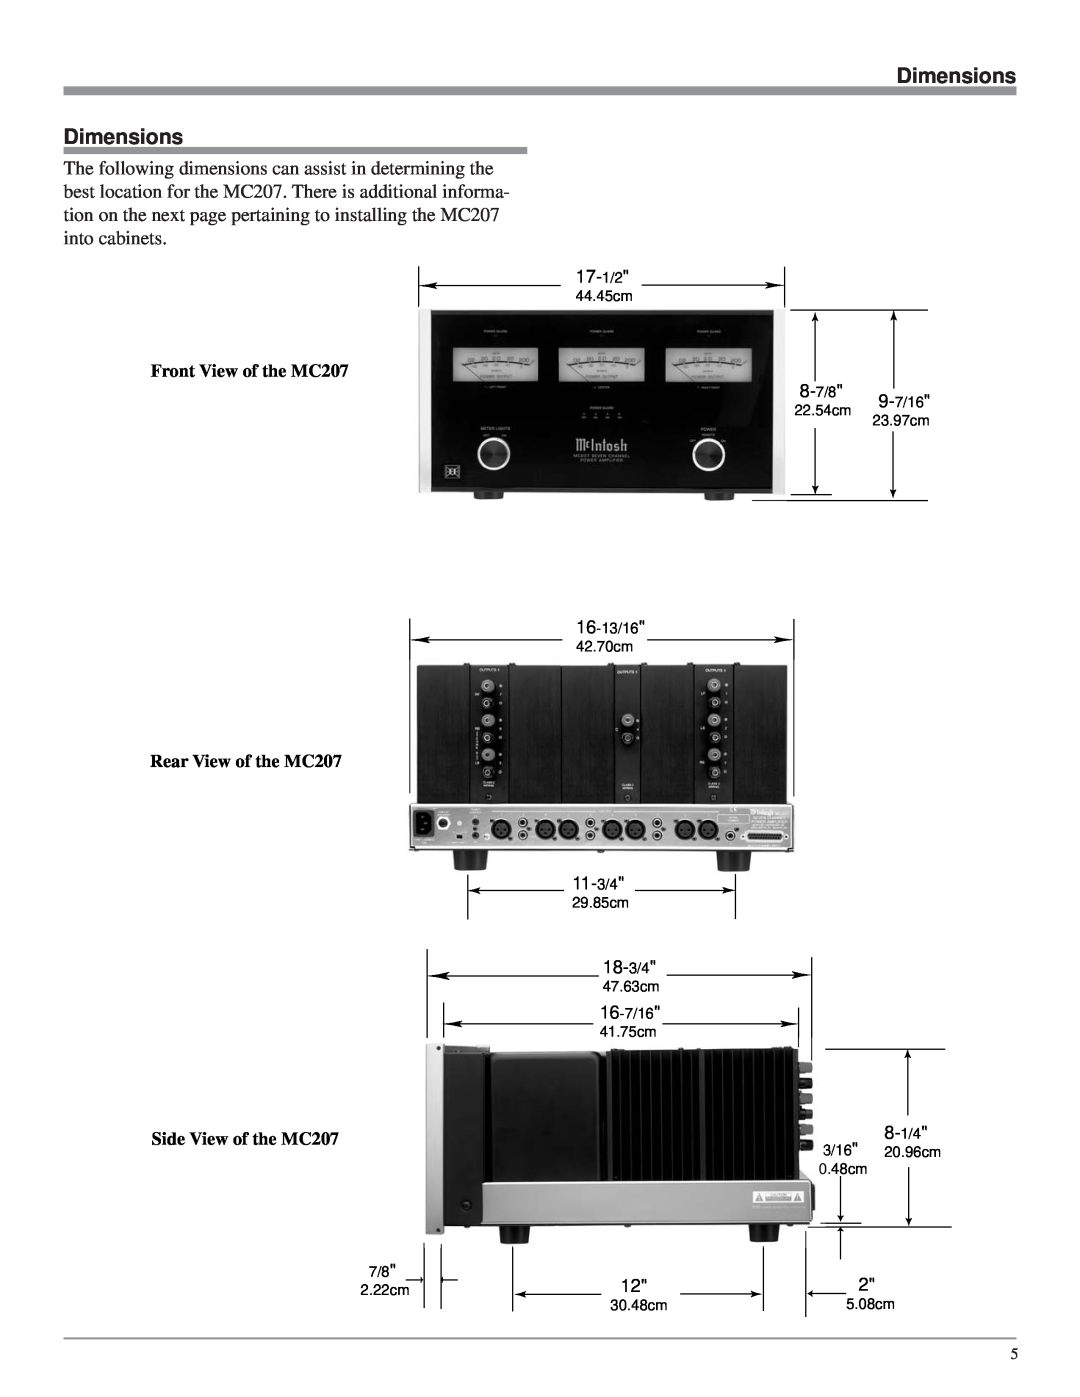 McIntosh Dimensions, 17-1/2, Front View of the MC207, Rear View of the MC207, 11-3/4, 18-3/4, Side View of the MC207 